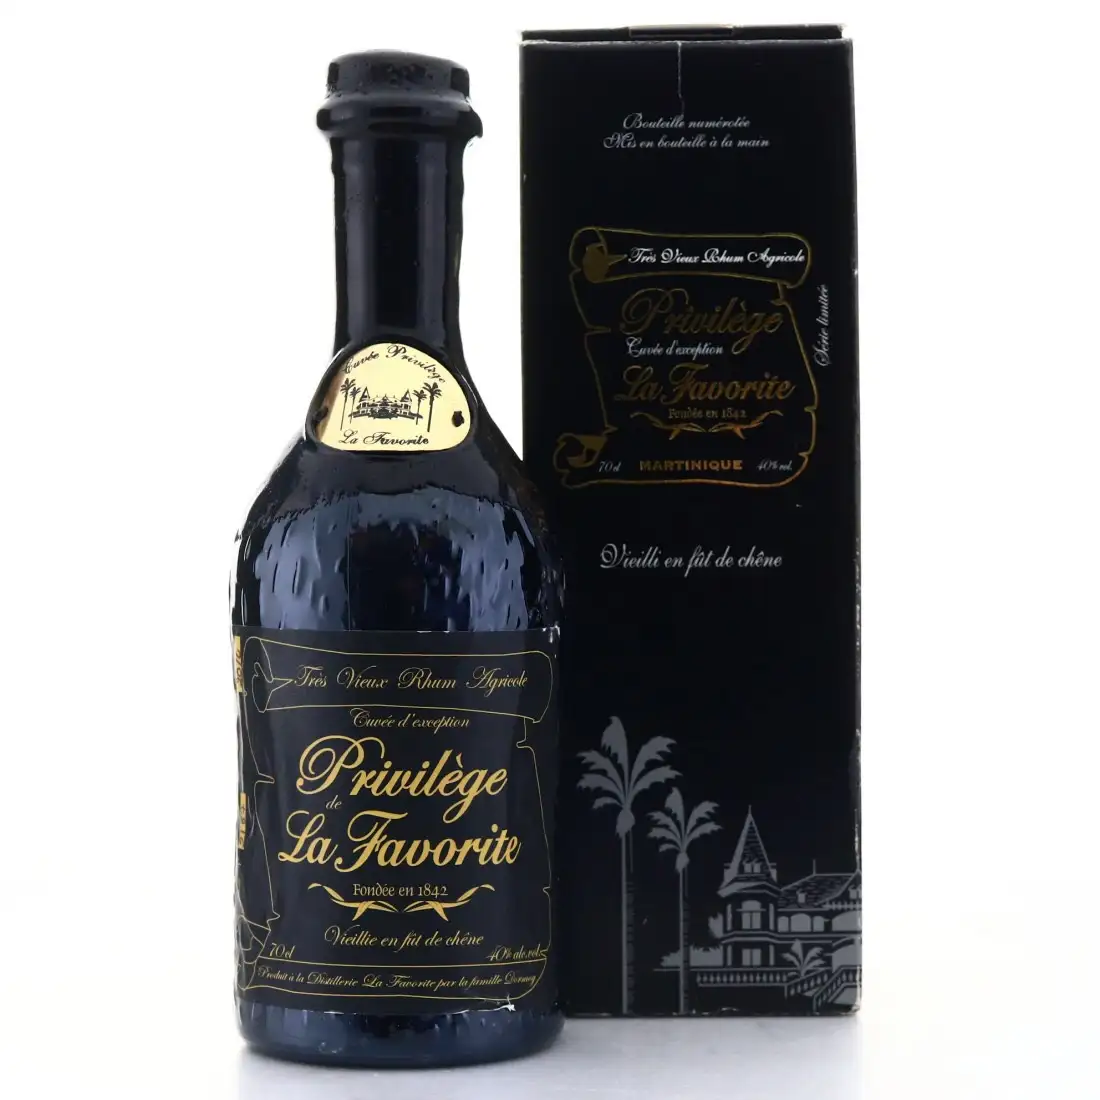 Image of the front of the bottle of the rum Privilège